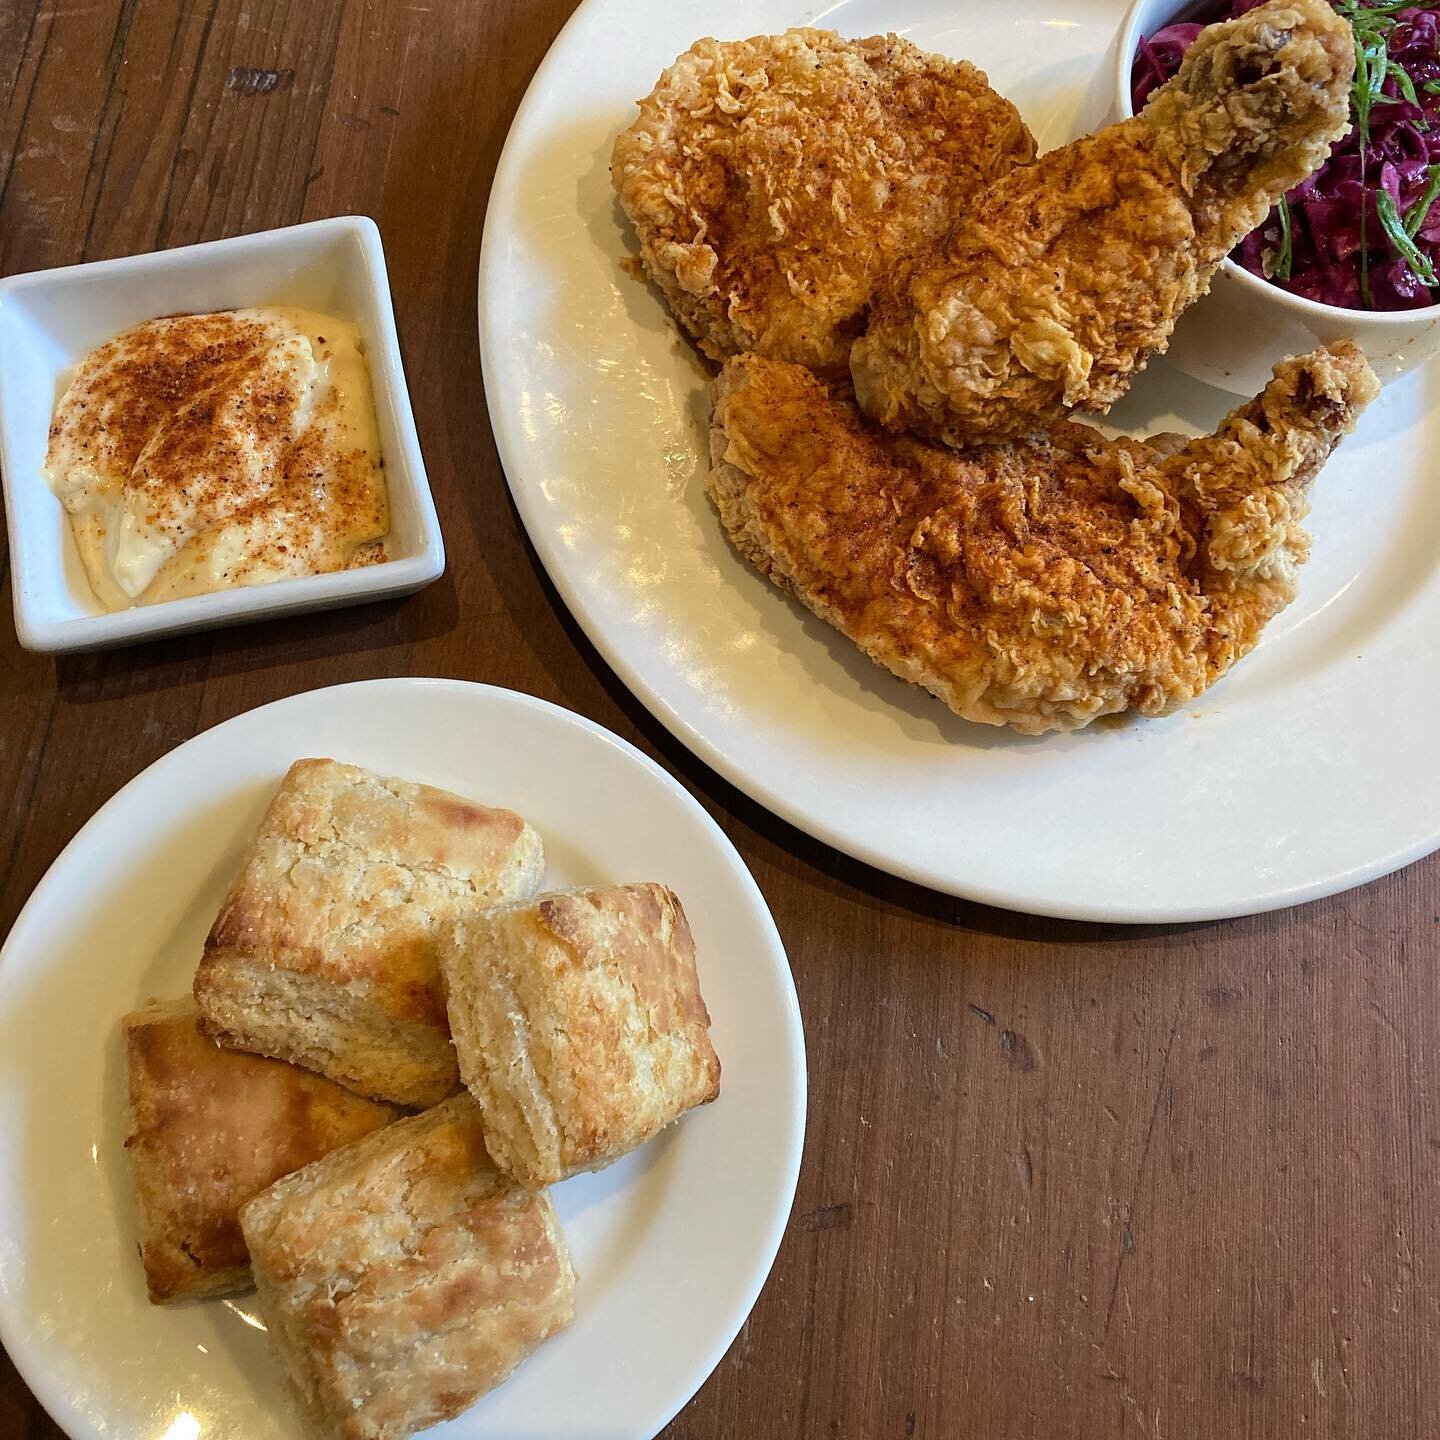 Check out our new Daily Meal Specials for Two! Tuesday is Fried Chicken Night - three pieces of fried chicken with our house seasoning, red cabbage slaw, sourdough biscuits and garlic mayo. The perfect &ldquo;I&rsquo;m not turning on the stove in thi